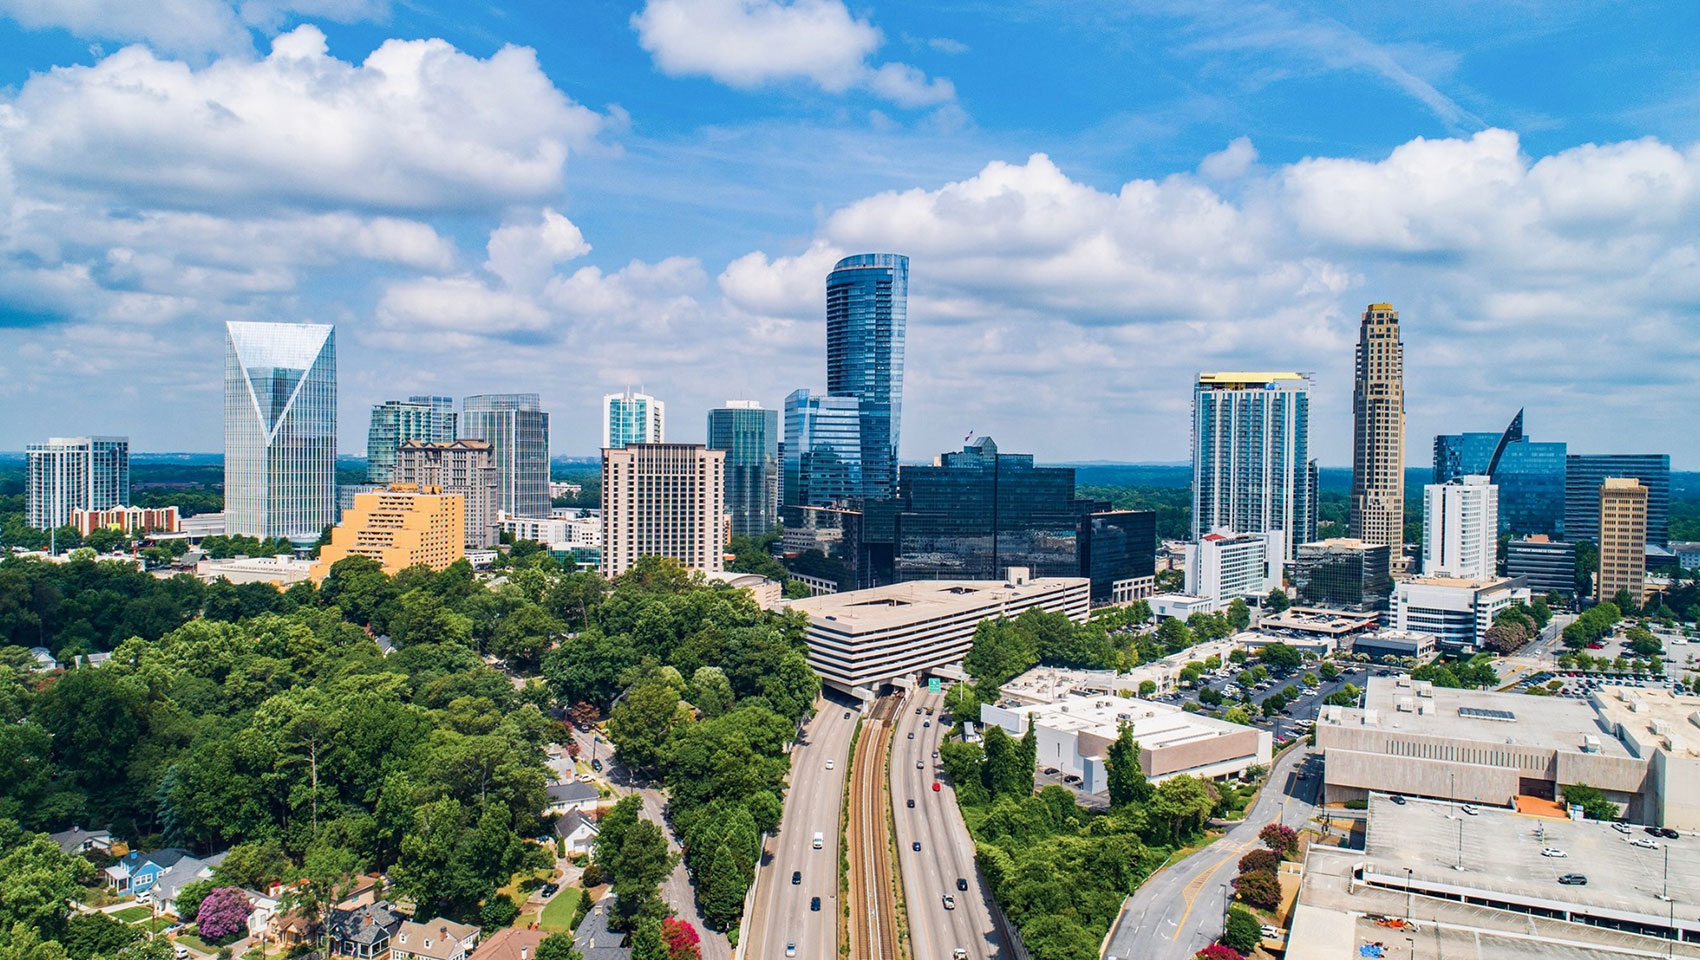 Atlanta downtown skyline during the day